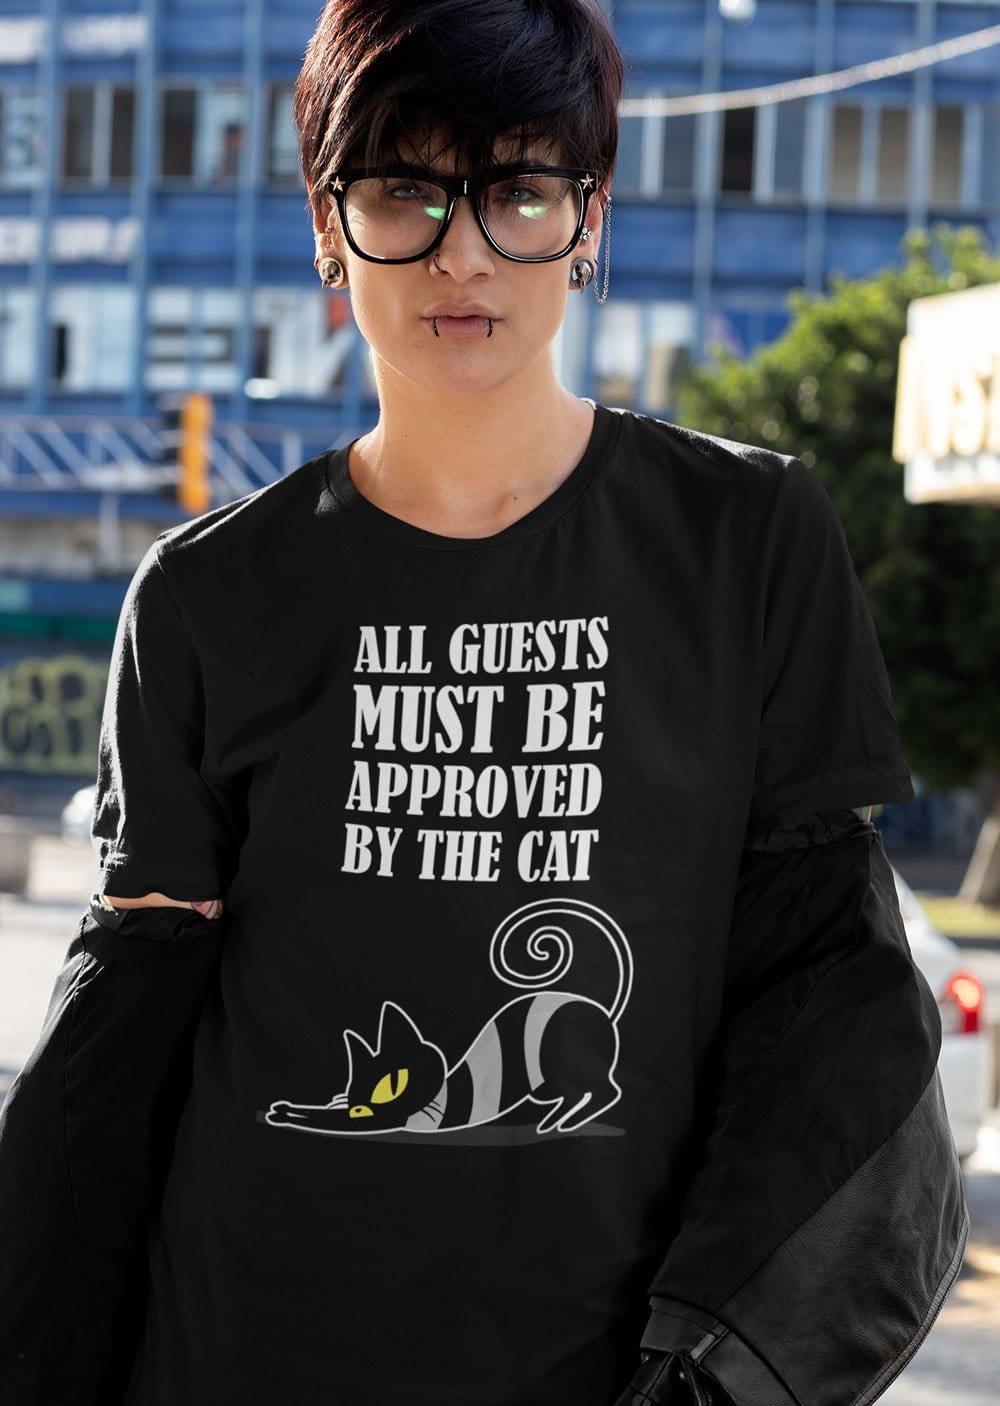 cat lover's meme tshirt featuing a meme phrase all guests must be approved by the cat in white lettering with a cute naughty black cat image